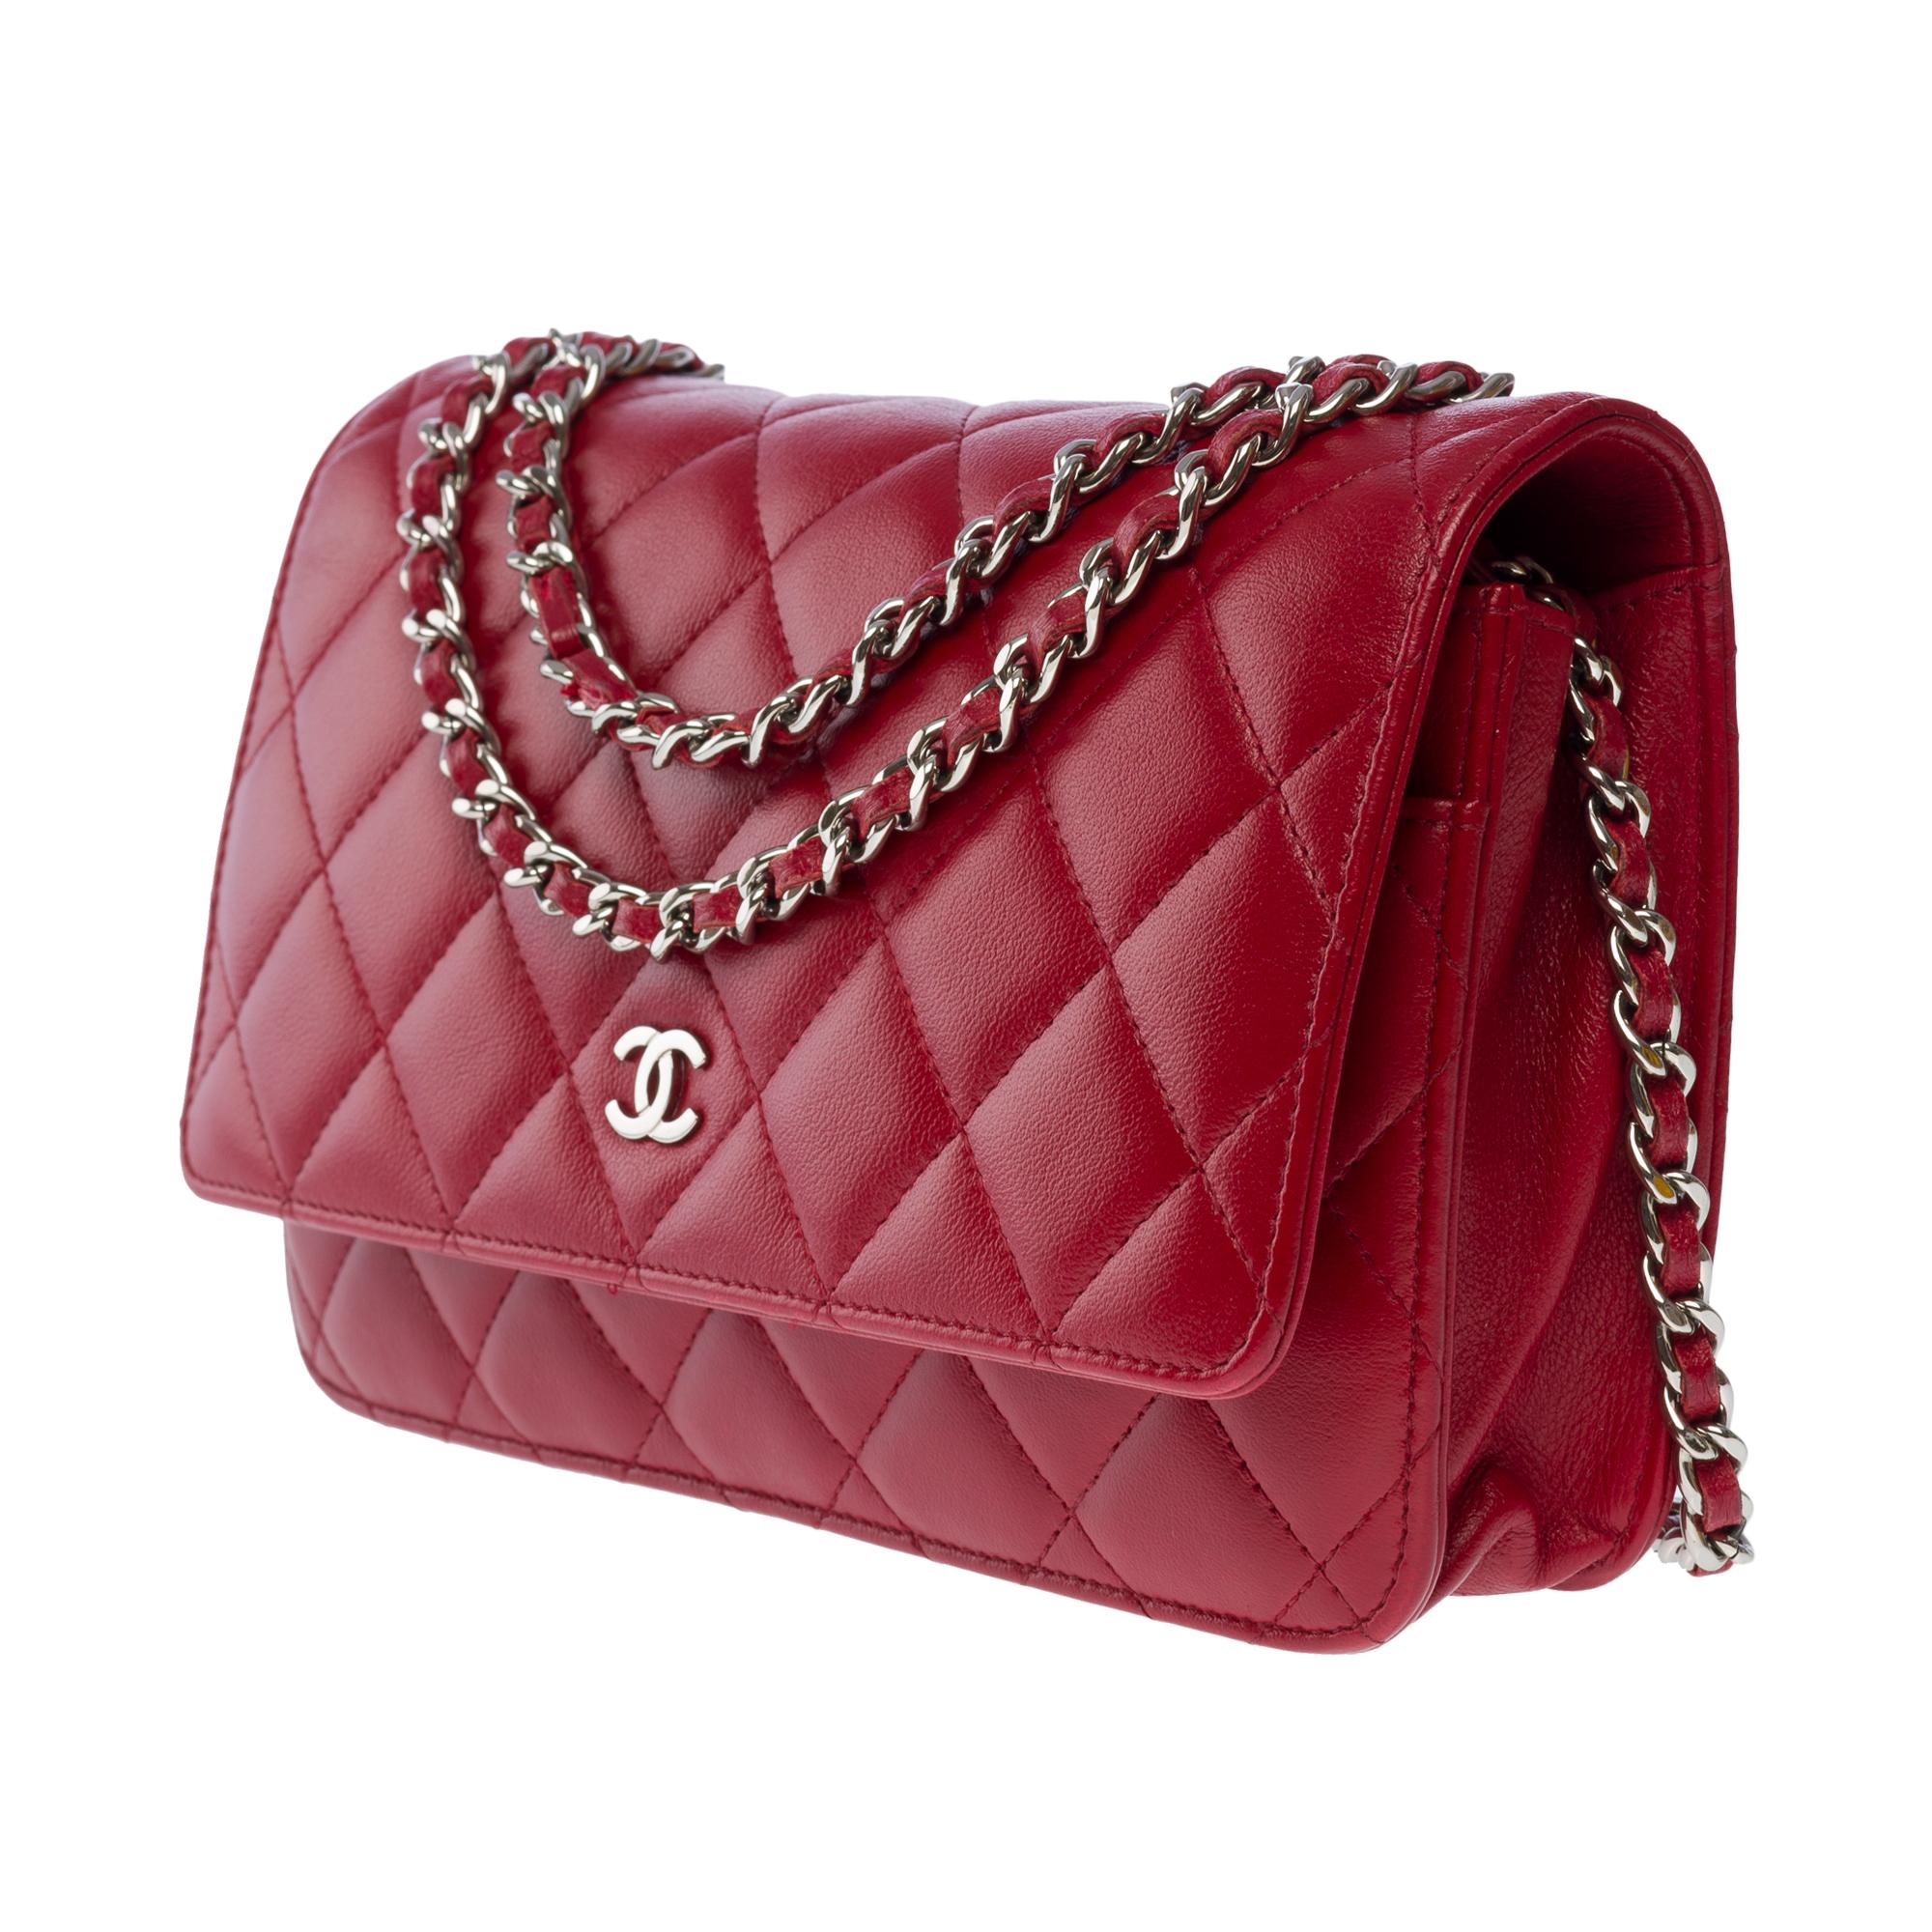 Women's Chanel Wallet on Chain (WOC)  shoulder bag in Red quilted lambskin leather, GHW